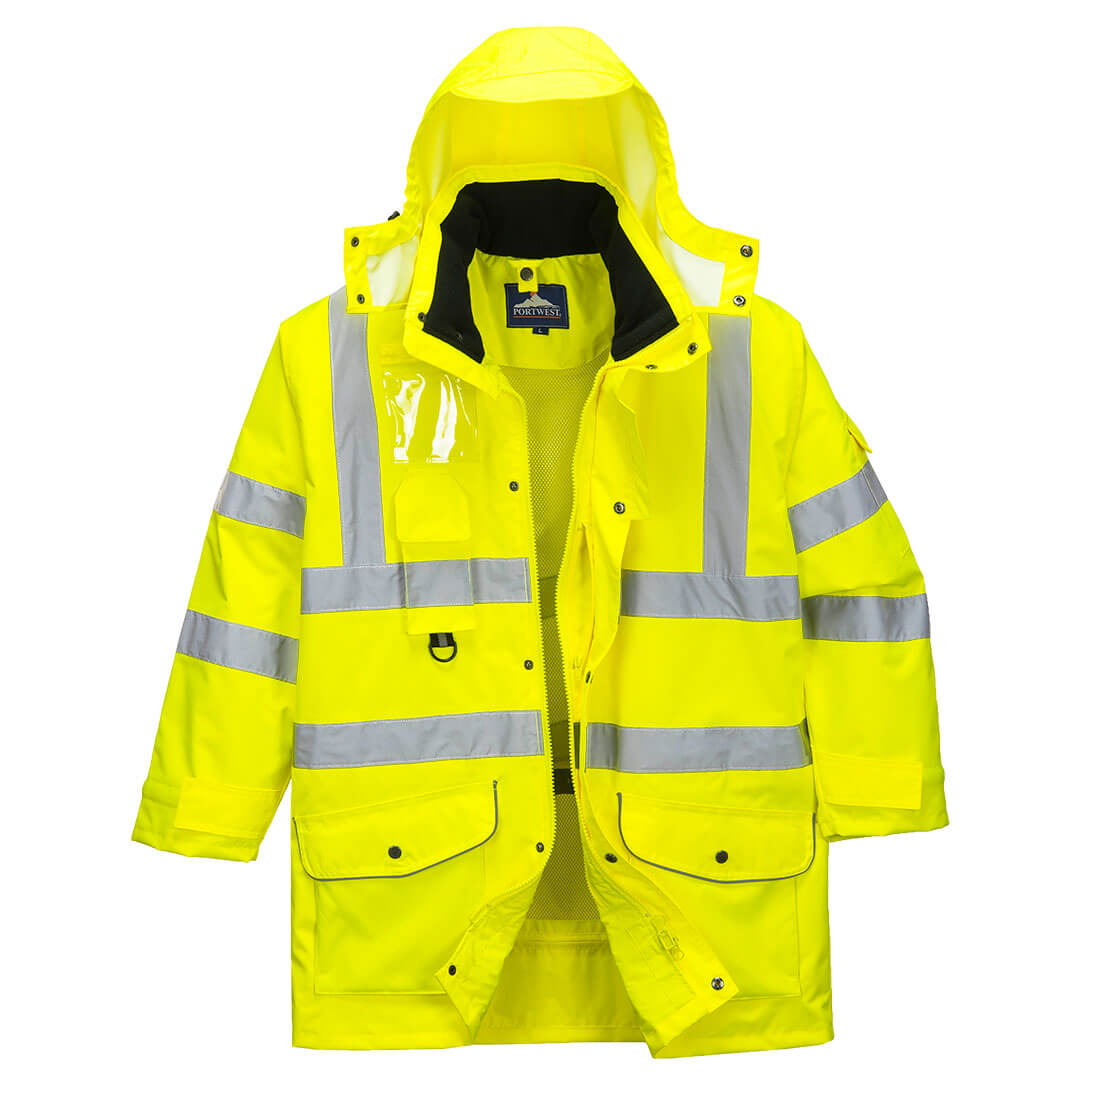 Oxford Weave 300D Class 3 Hi Vis 7-in-1 Traffic Jacket Yellow S